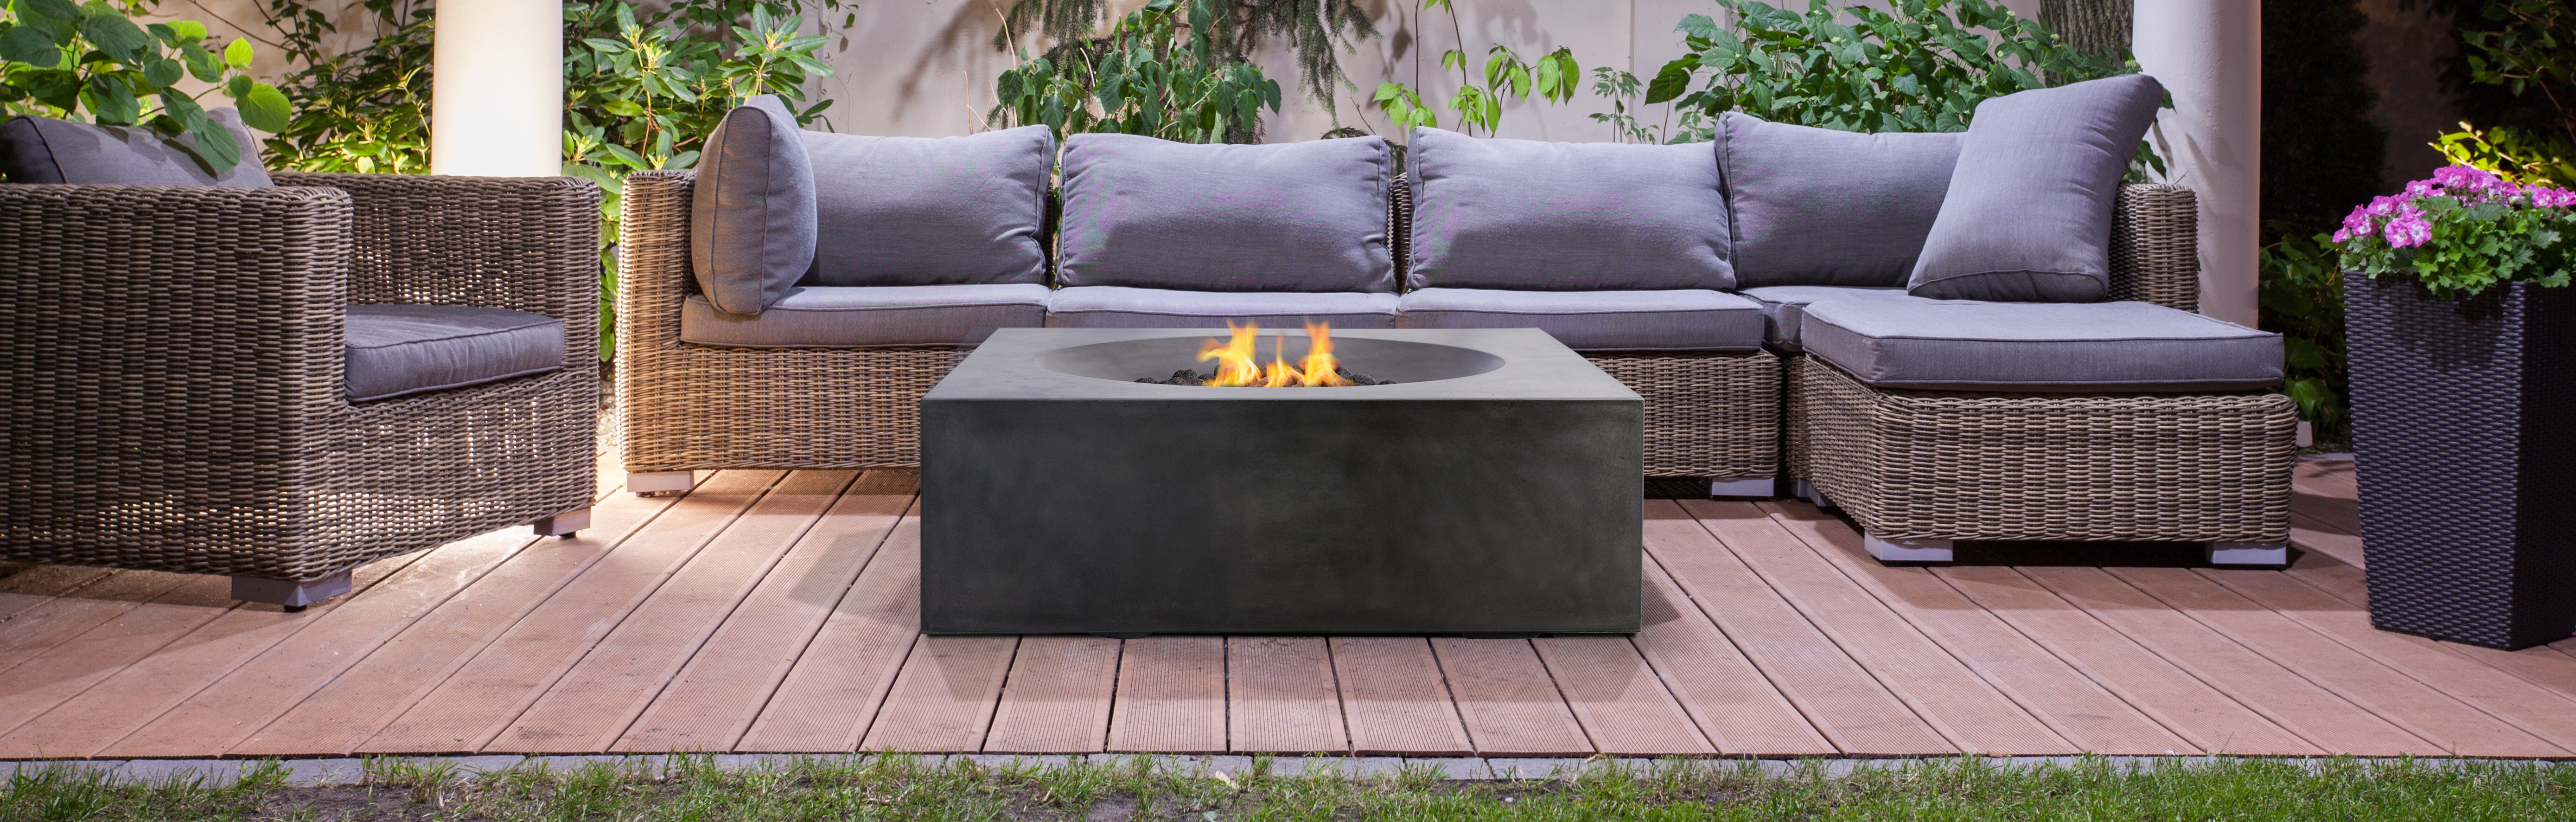 Tao Fire Table - The Professional Line